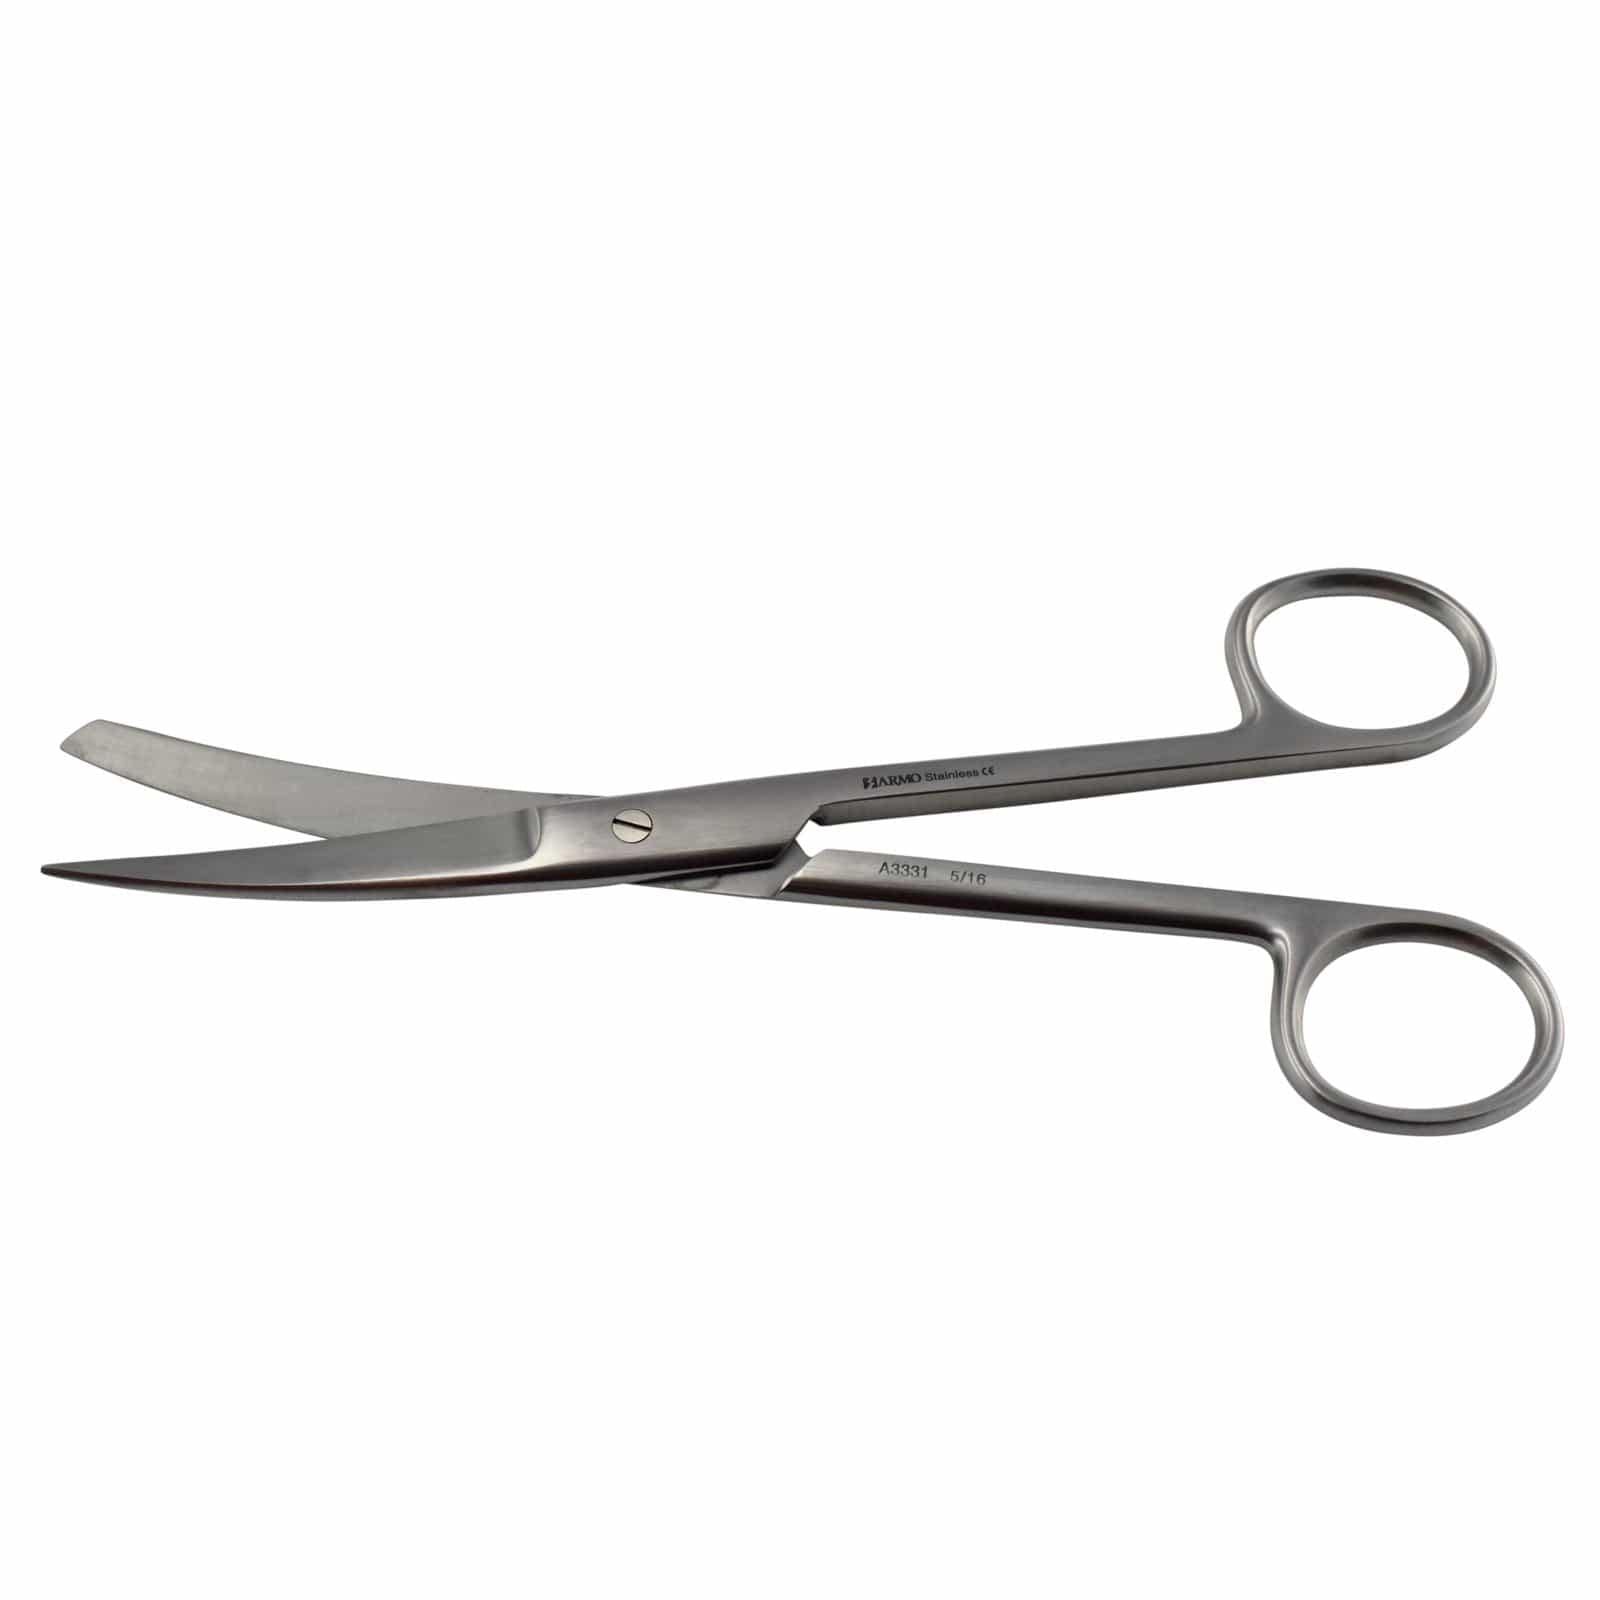 Armo Surgical Instruments 18cm / Curved / Sharp/Blunt Armo Surgical Scissors